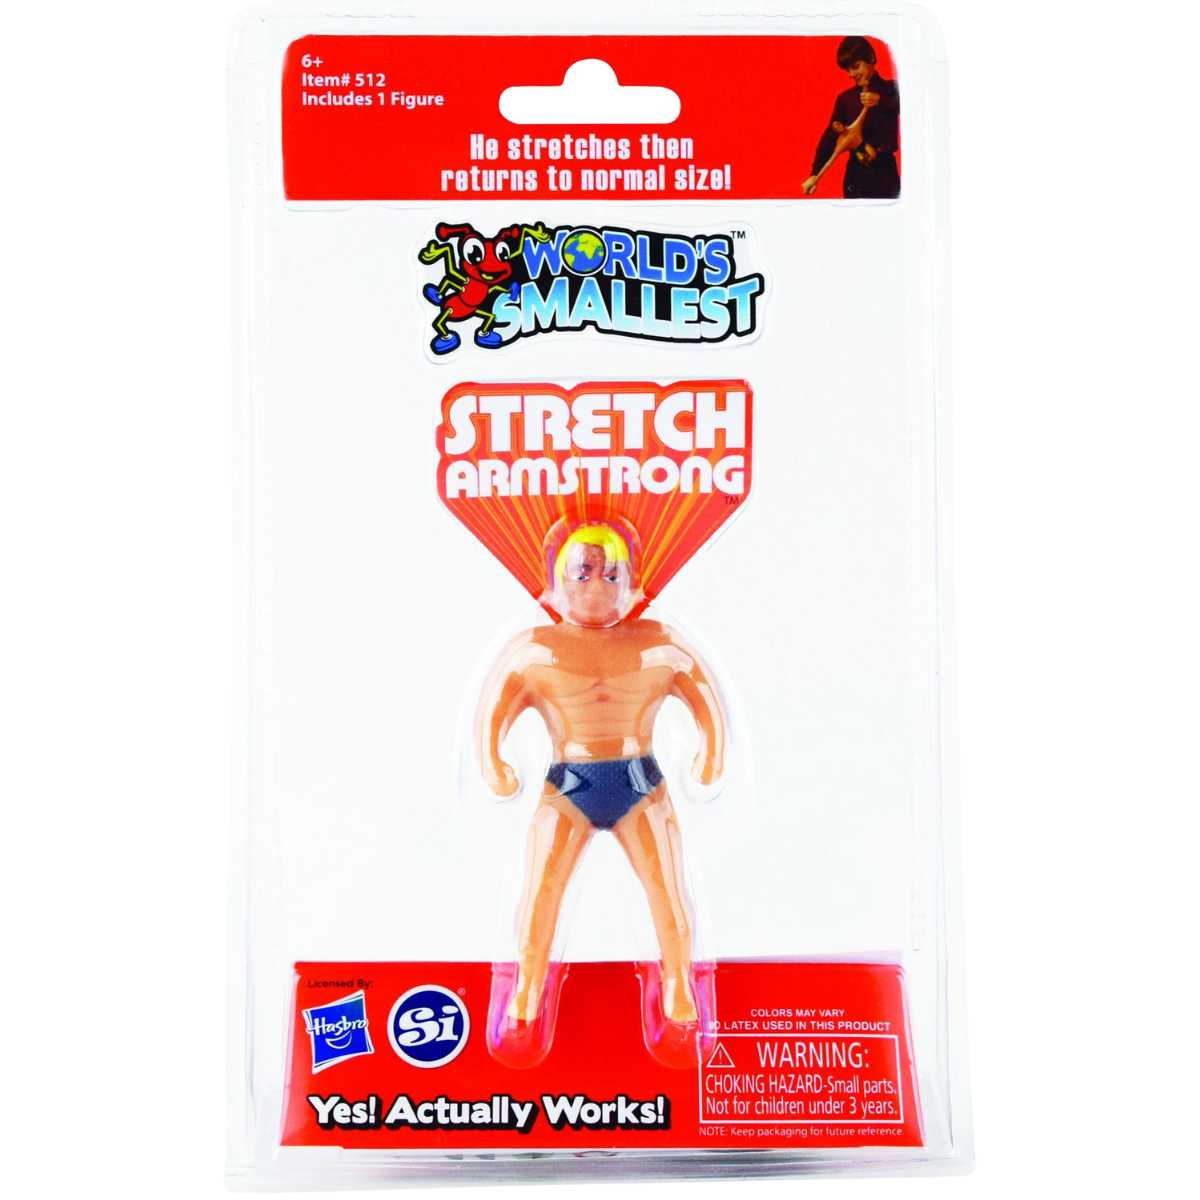 World's Smallest Stretch Armstrong Toy - Retro Collectible - Simon's Collectibles